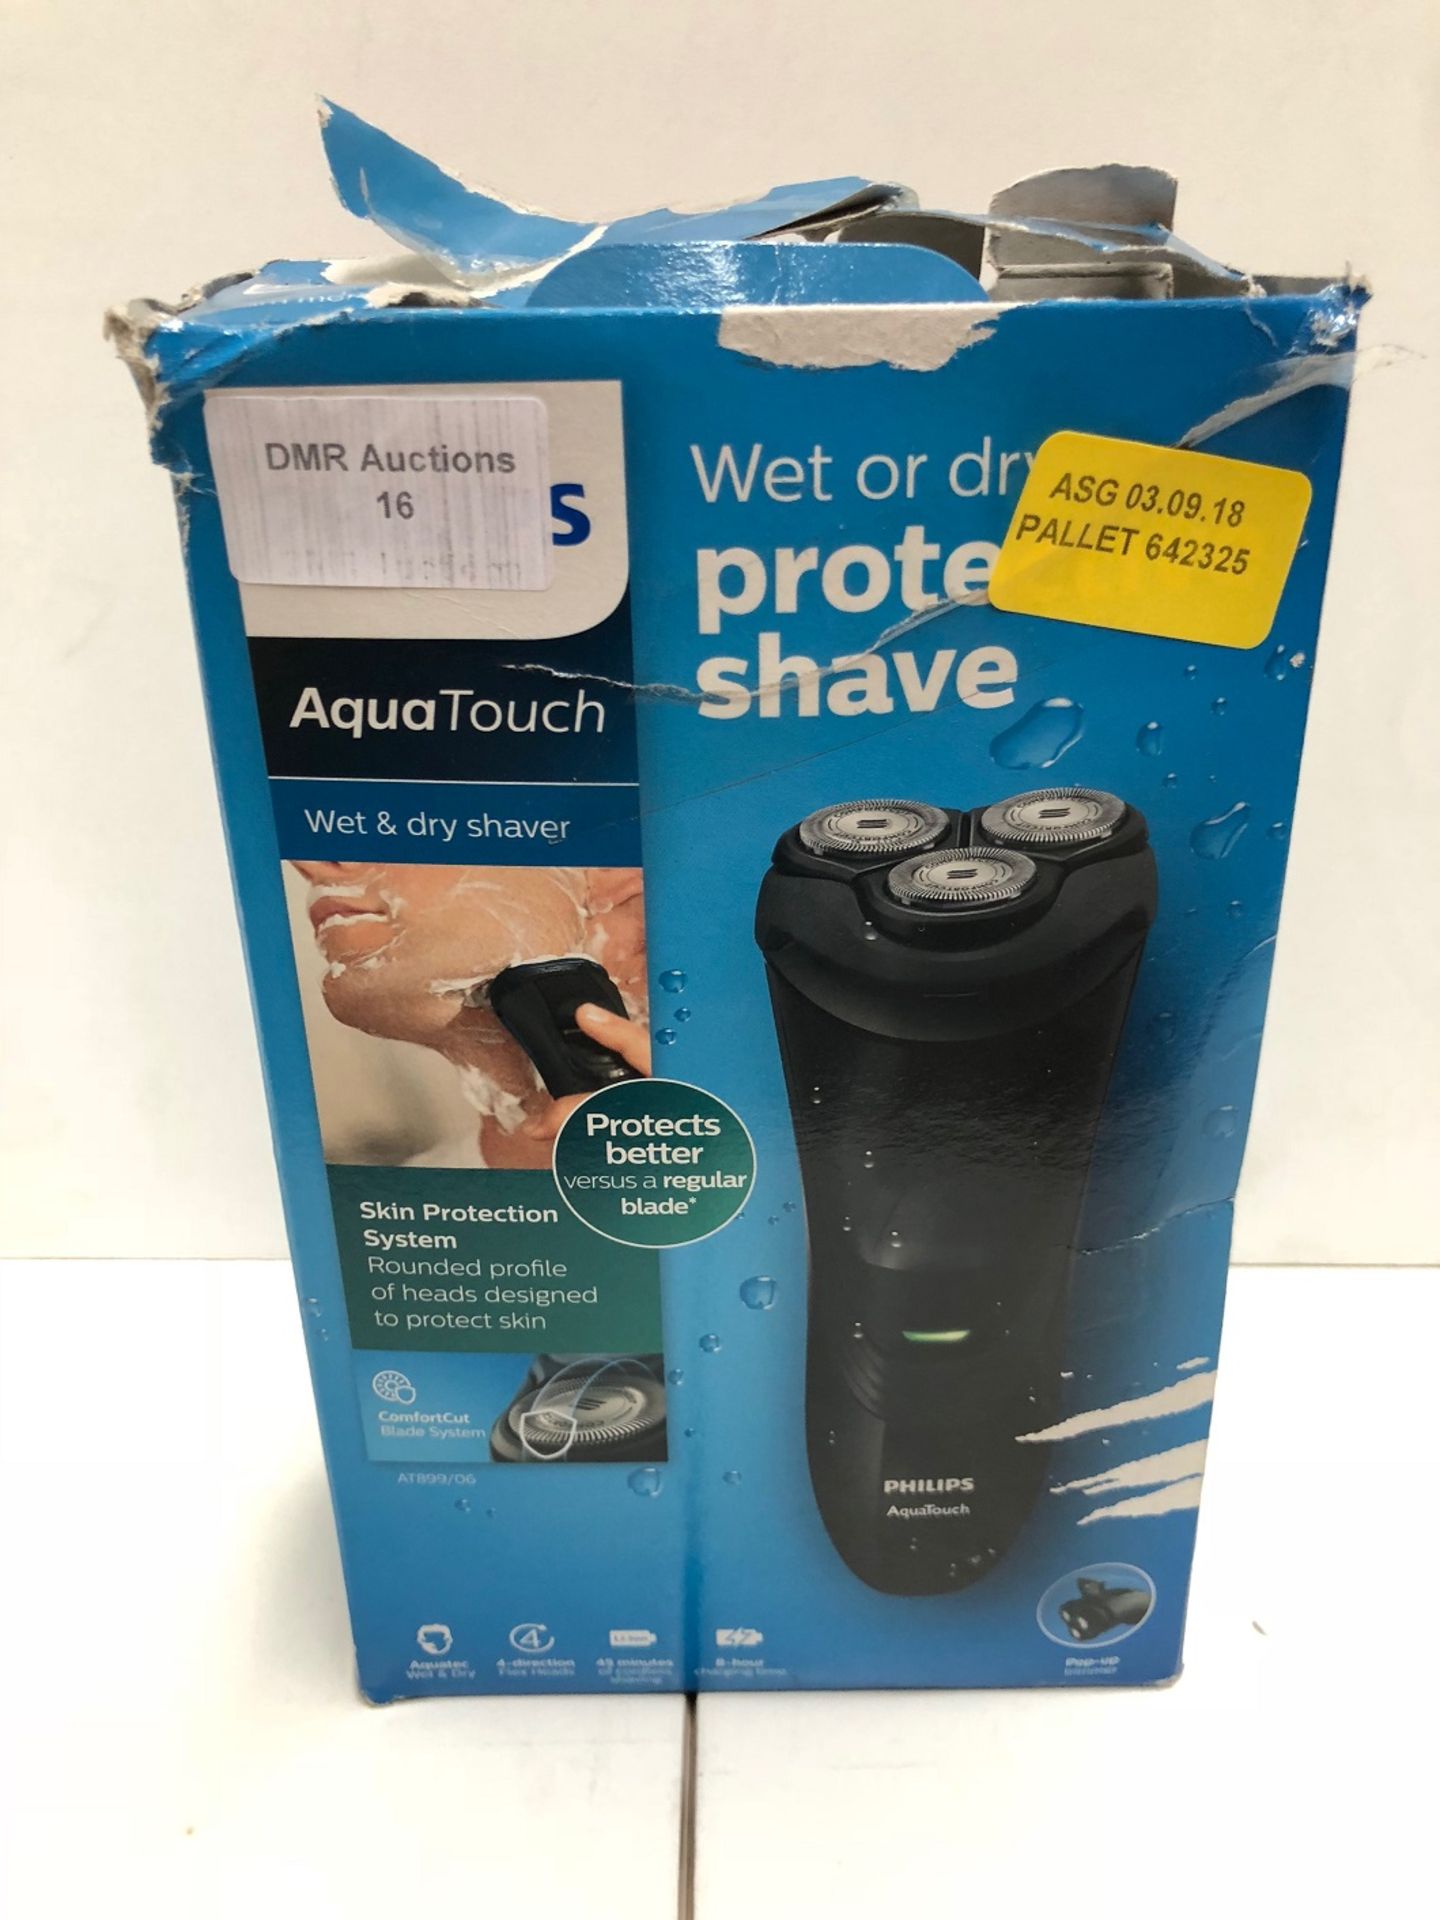 1 / PHILIPS WET OR DRY SHAVER RRP £60 / ASG 03.09.18 PALLET 642325 (VIEWING HIGHLY RECOMMENDED)